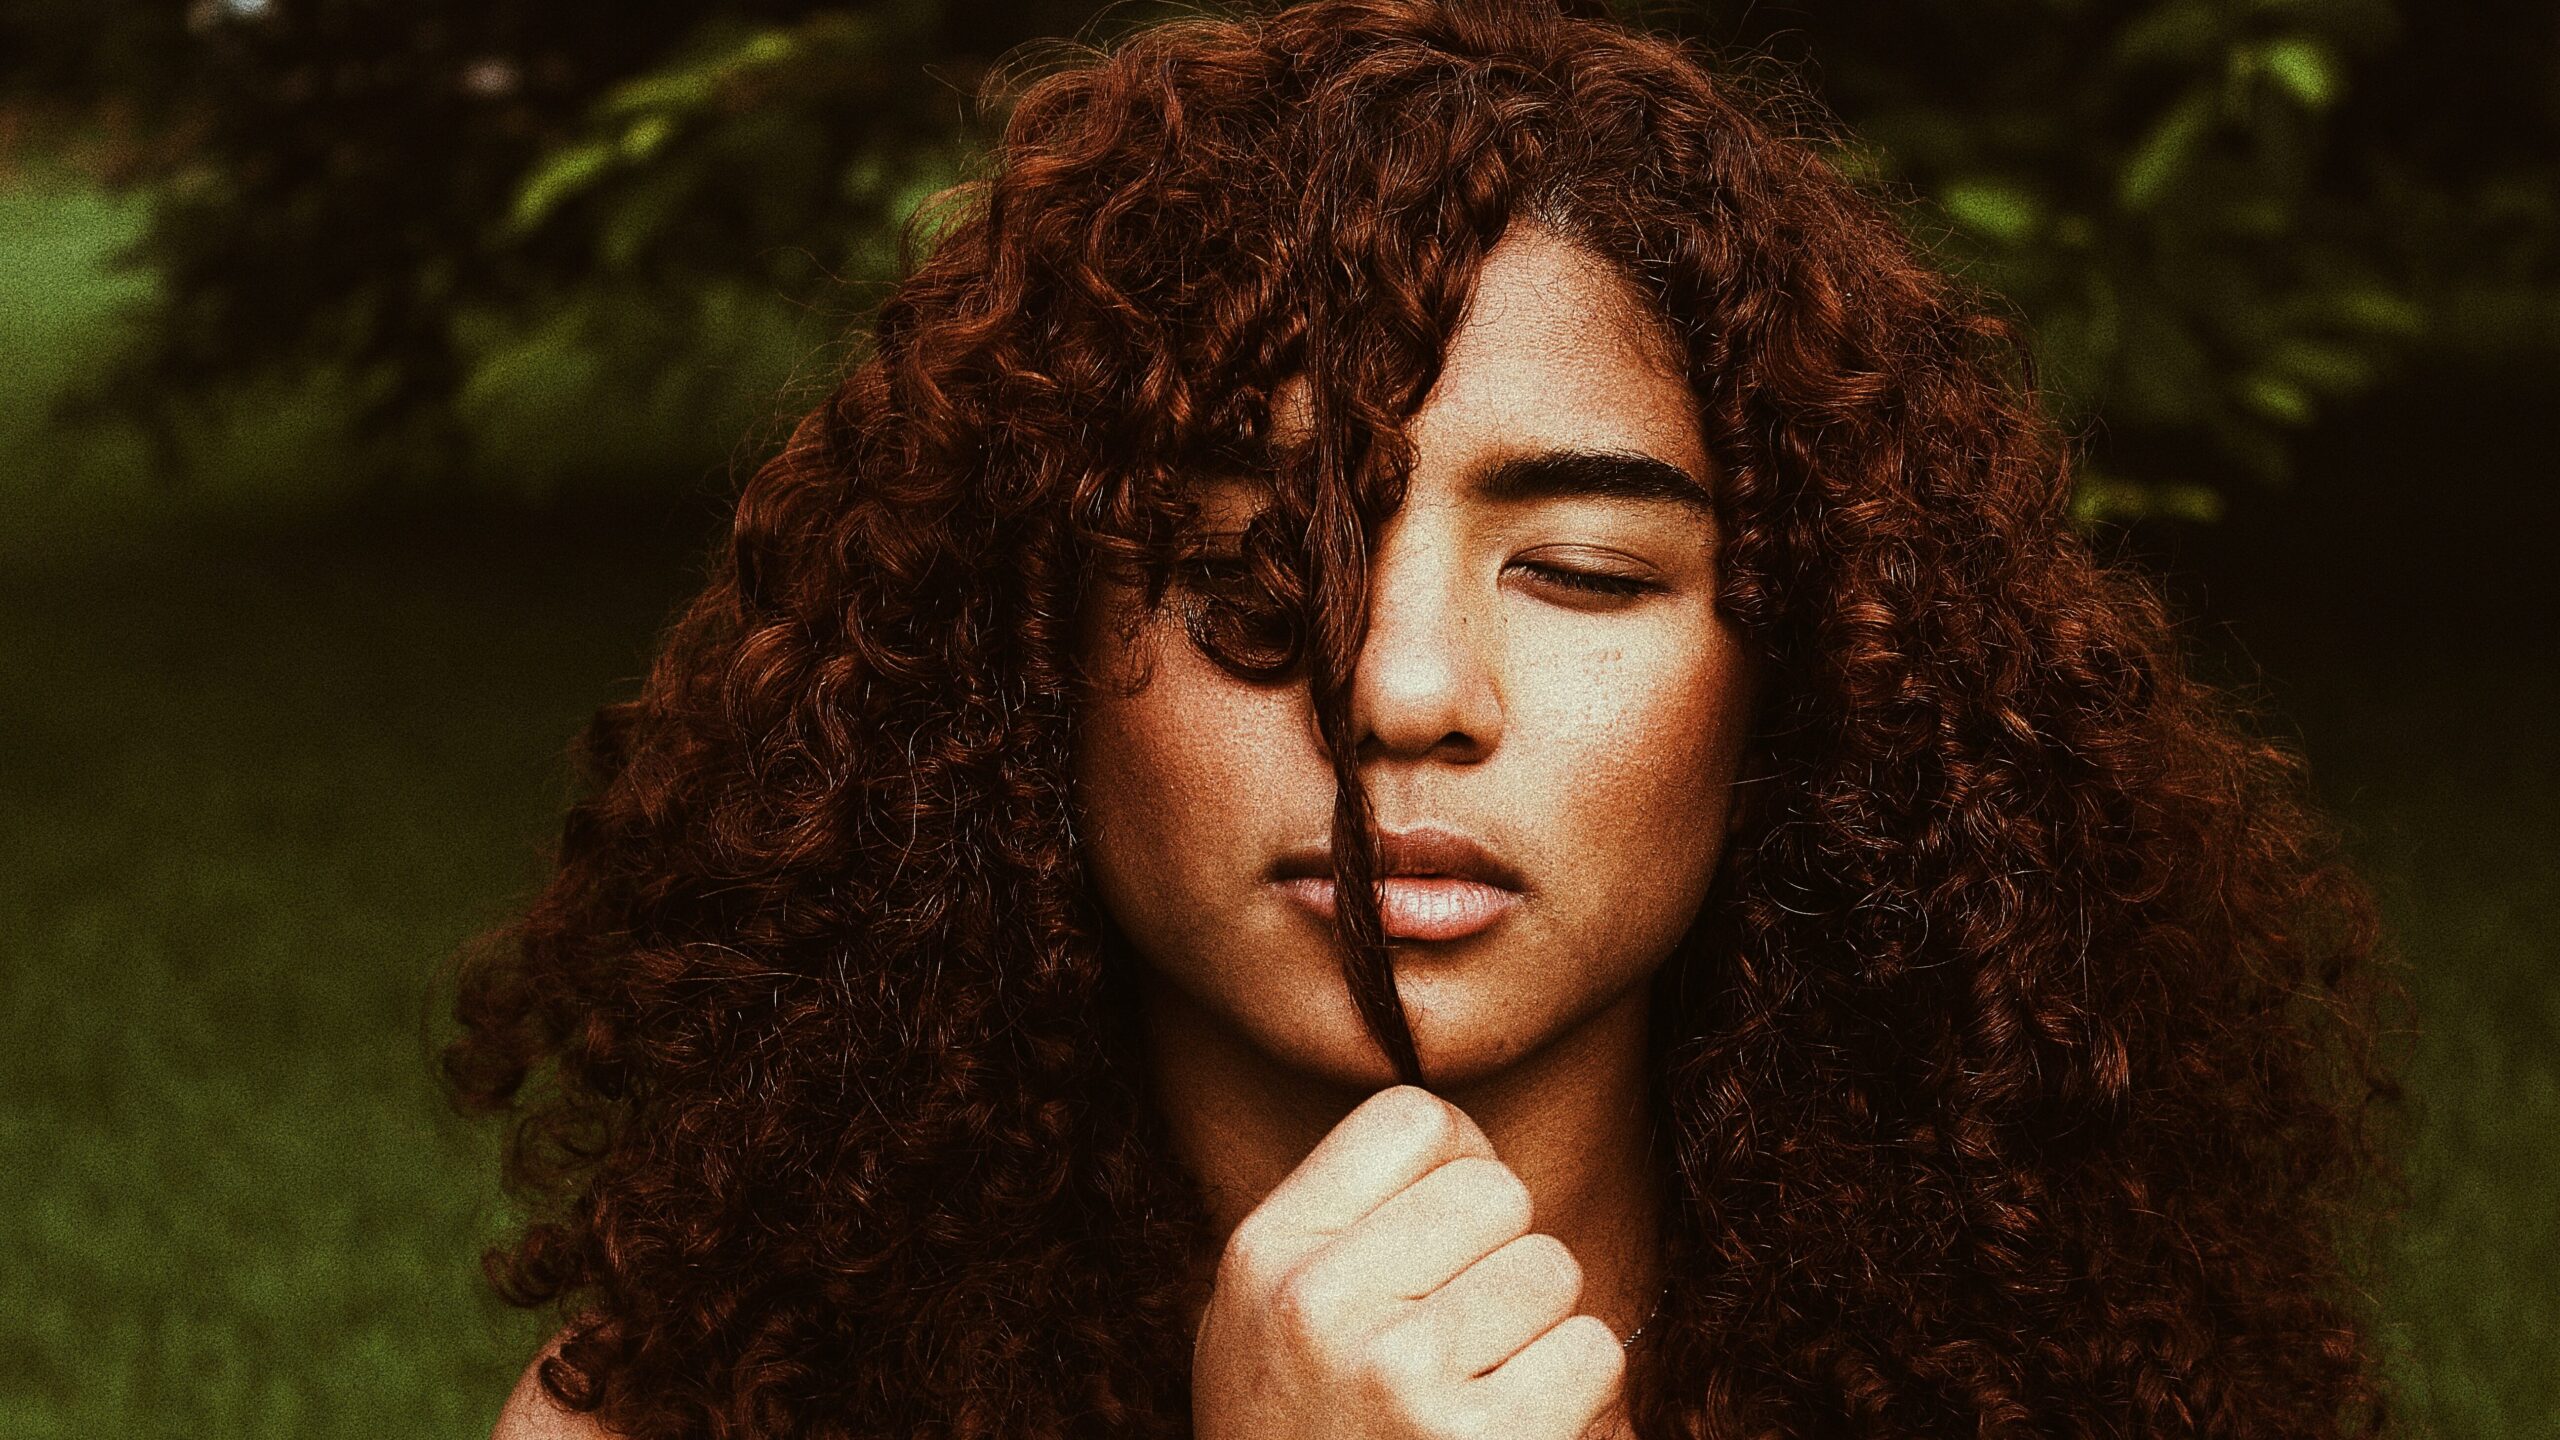 Woman pulling a strand of her curly hair in front of her face